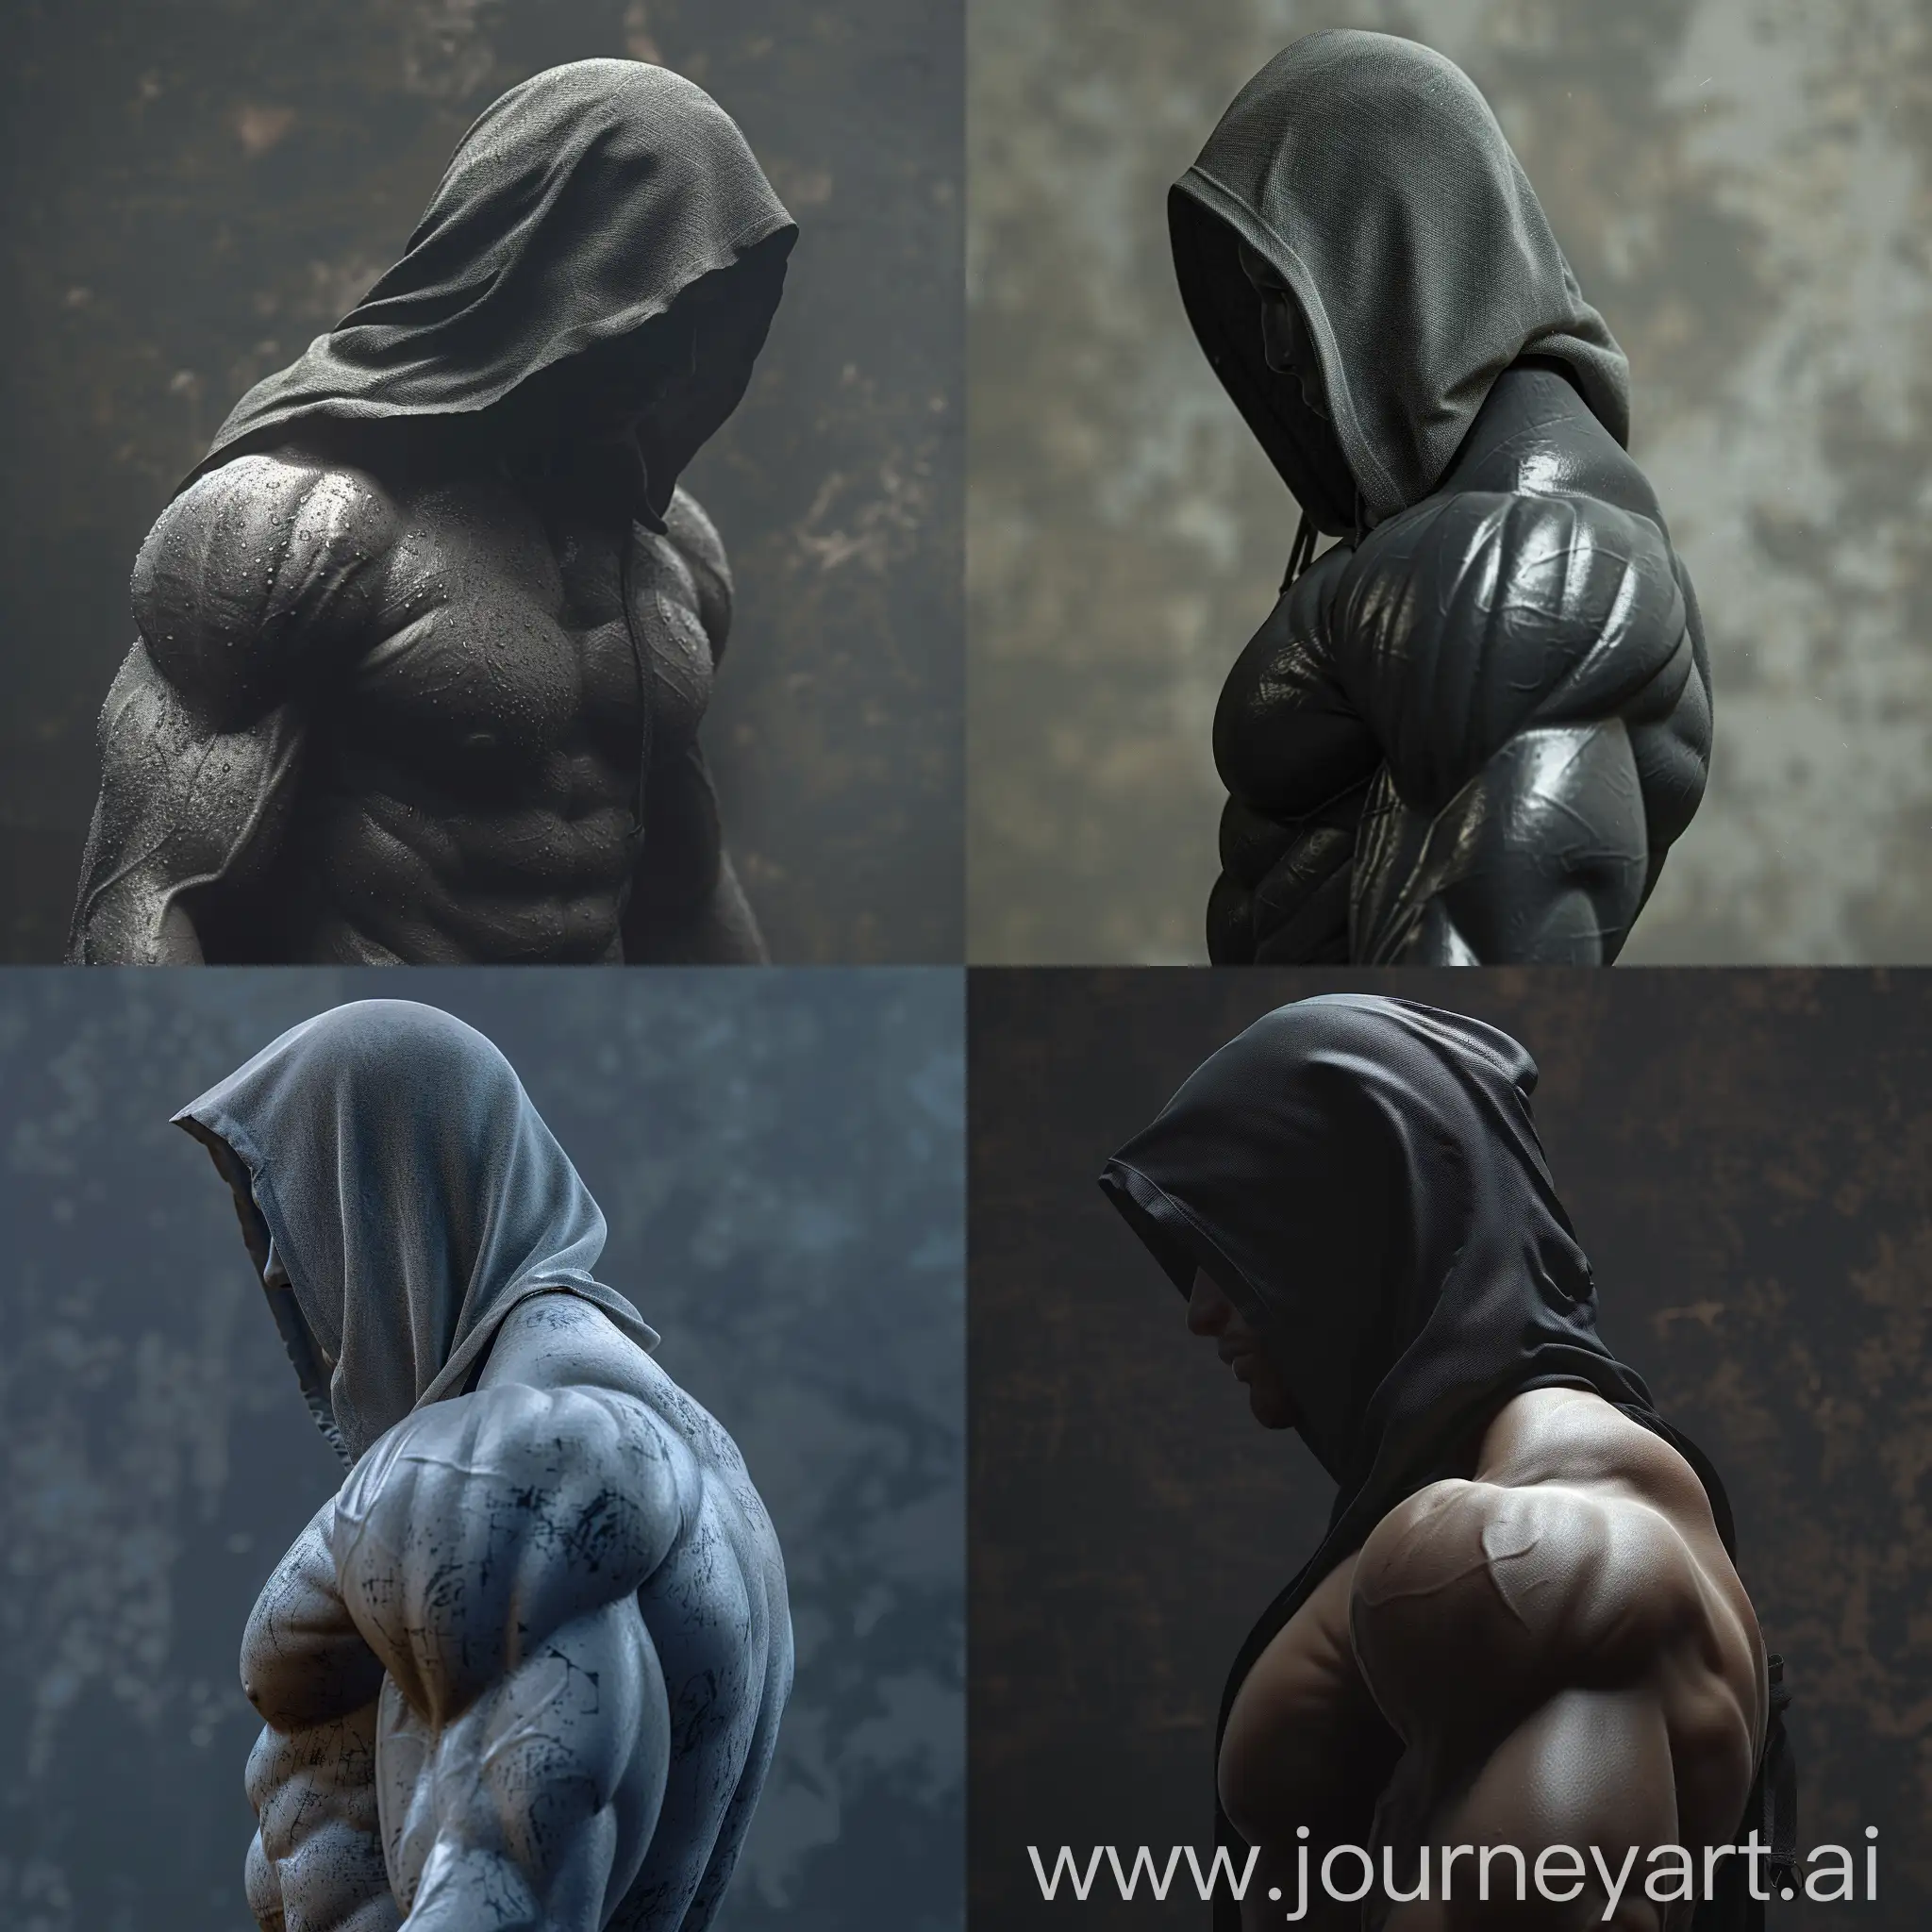 hyper realistic anonymous muscular figure with hood up, cant see face, from the side or behind, with stunning backdrop

8k